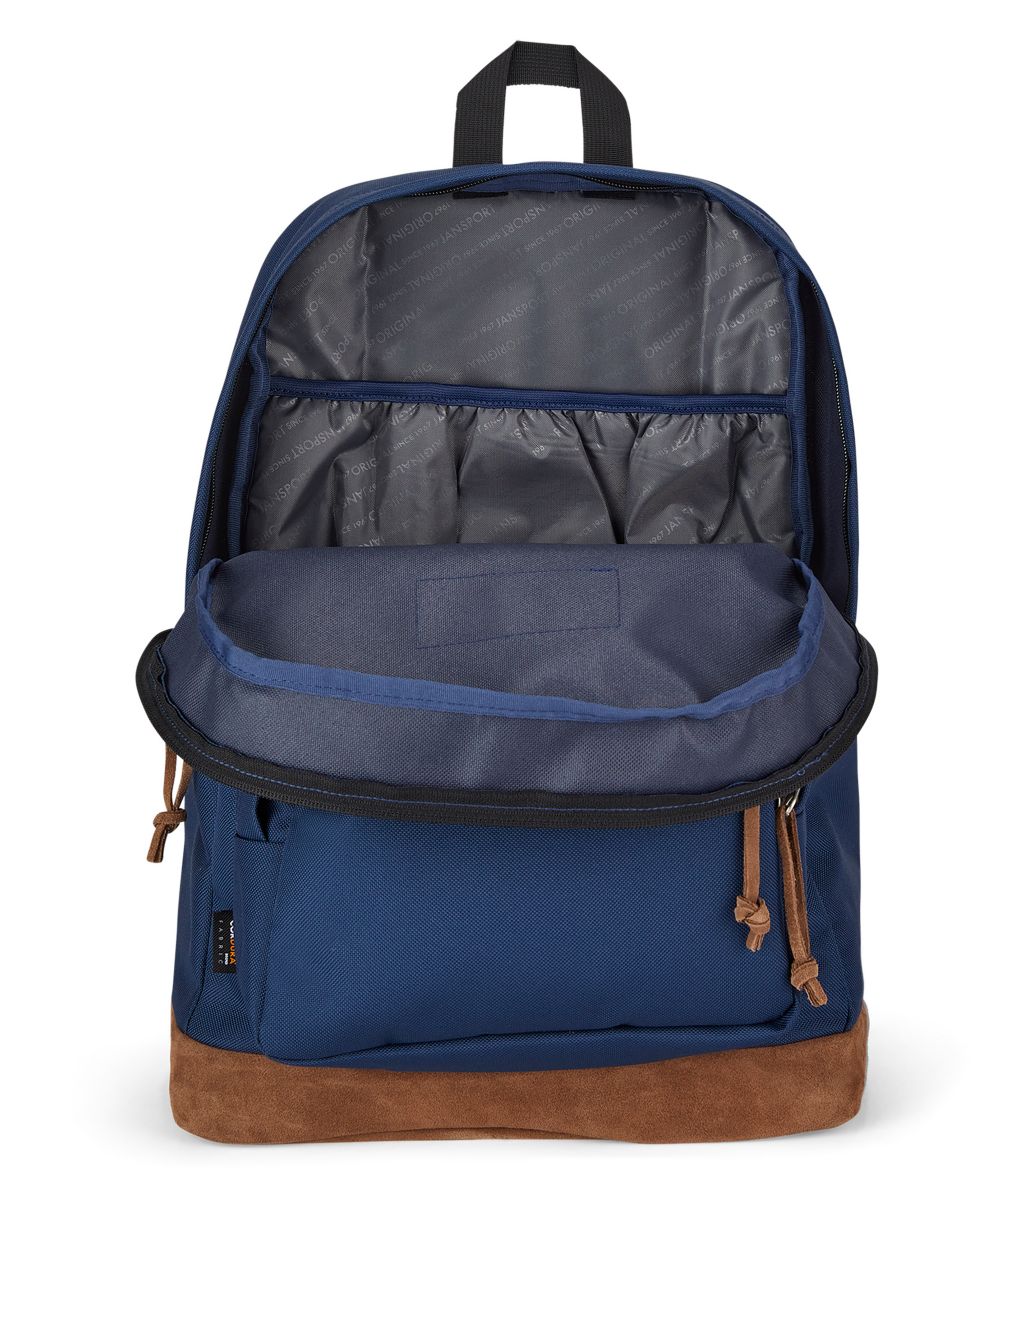 Right Pack Backpack image 3